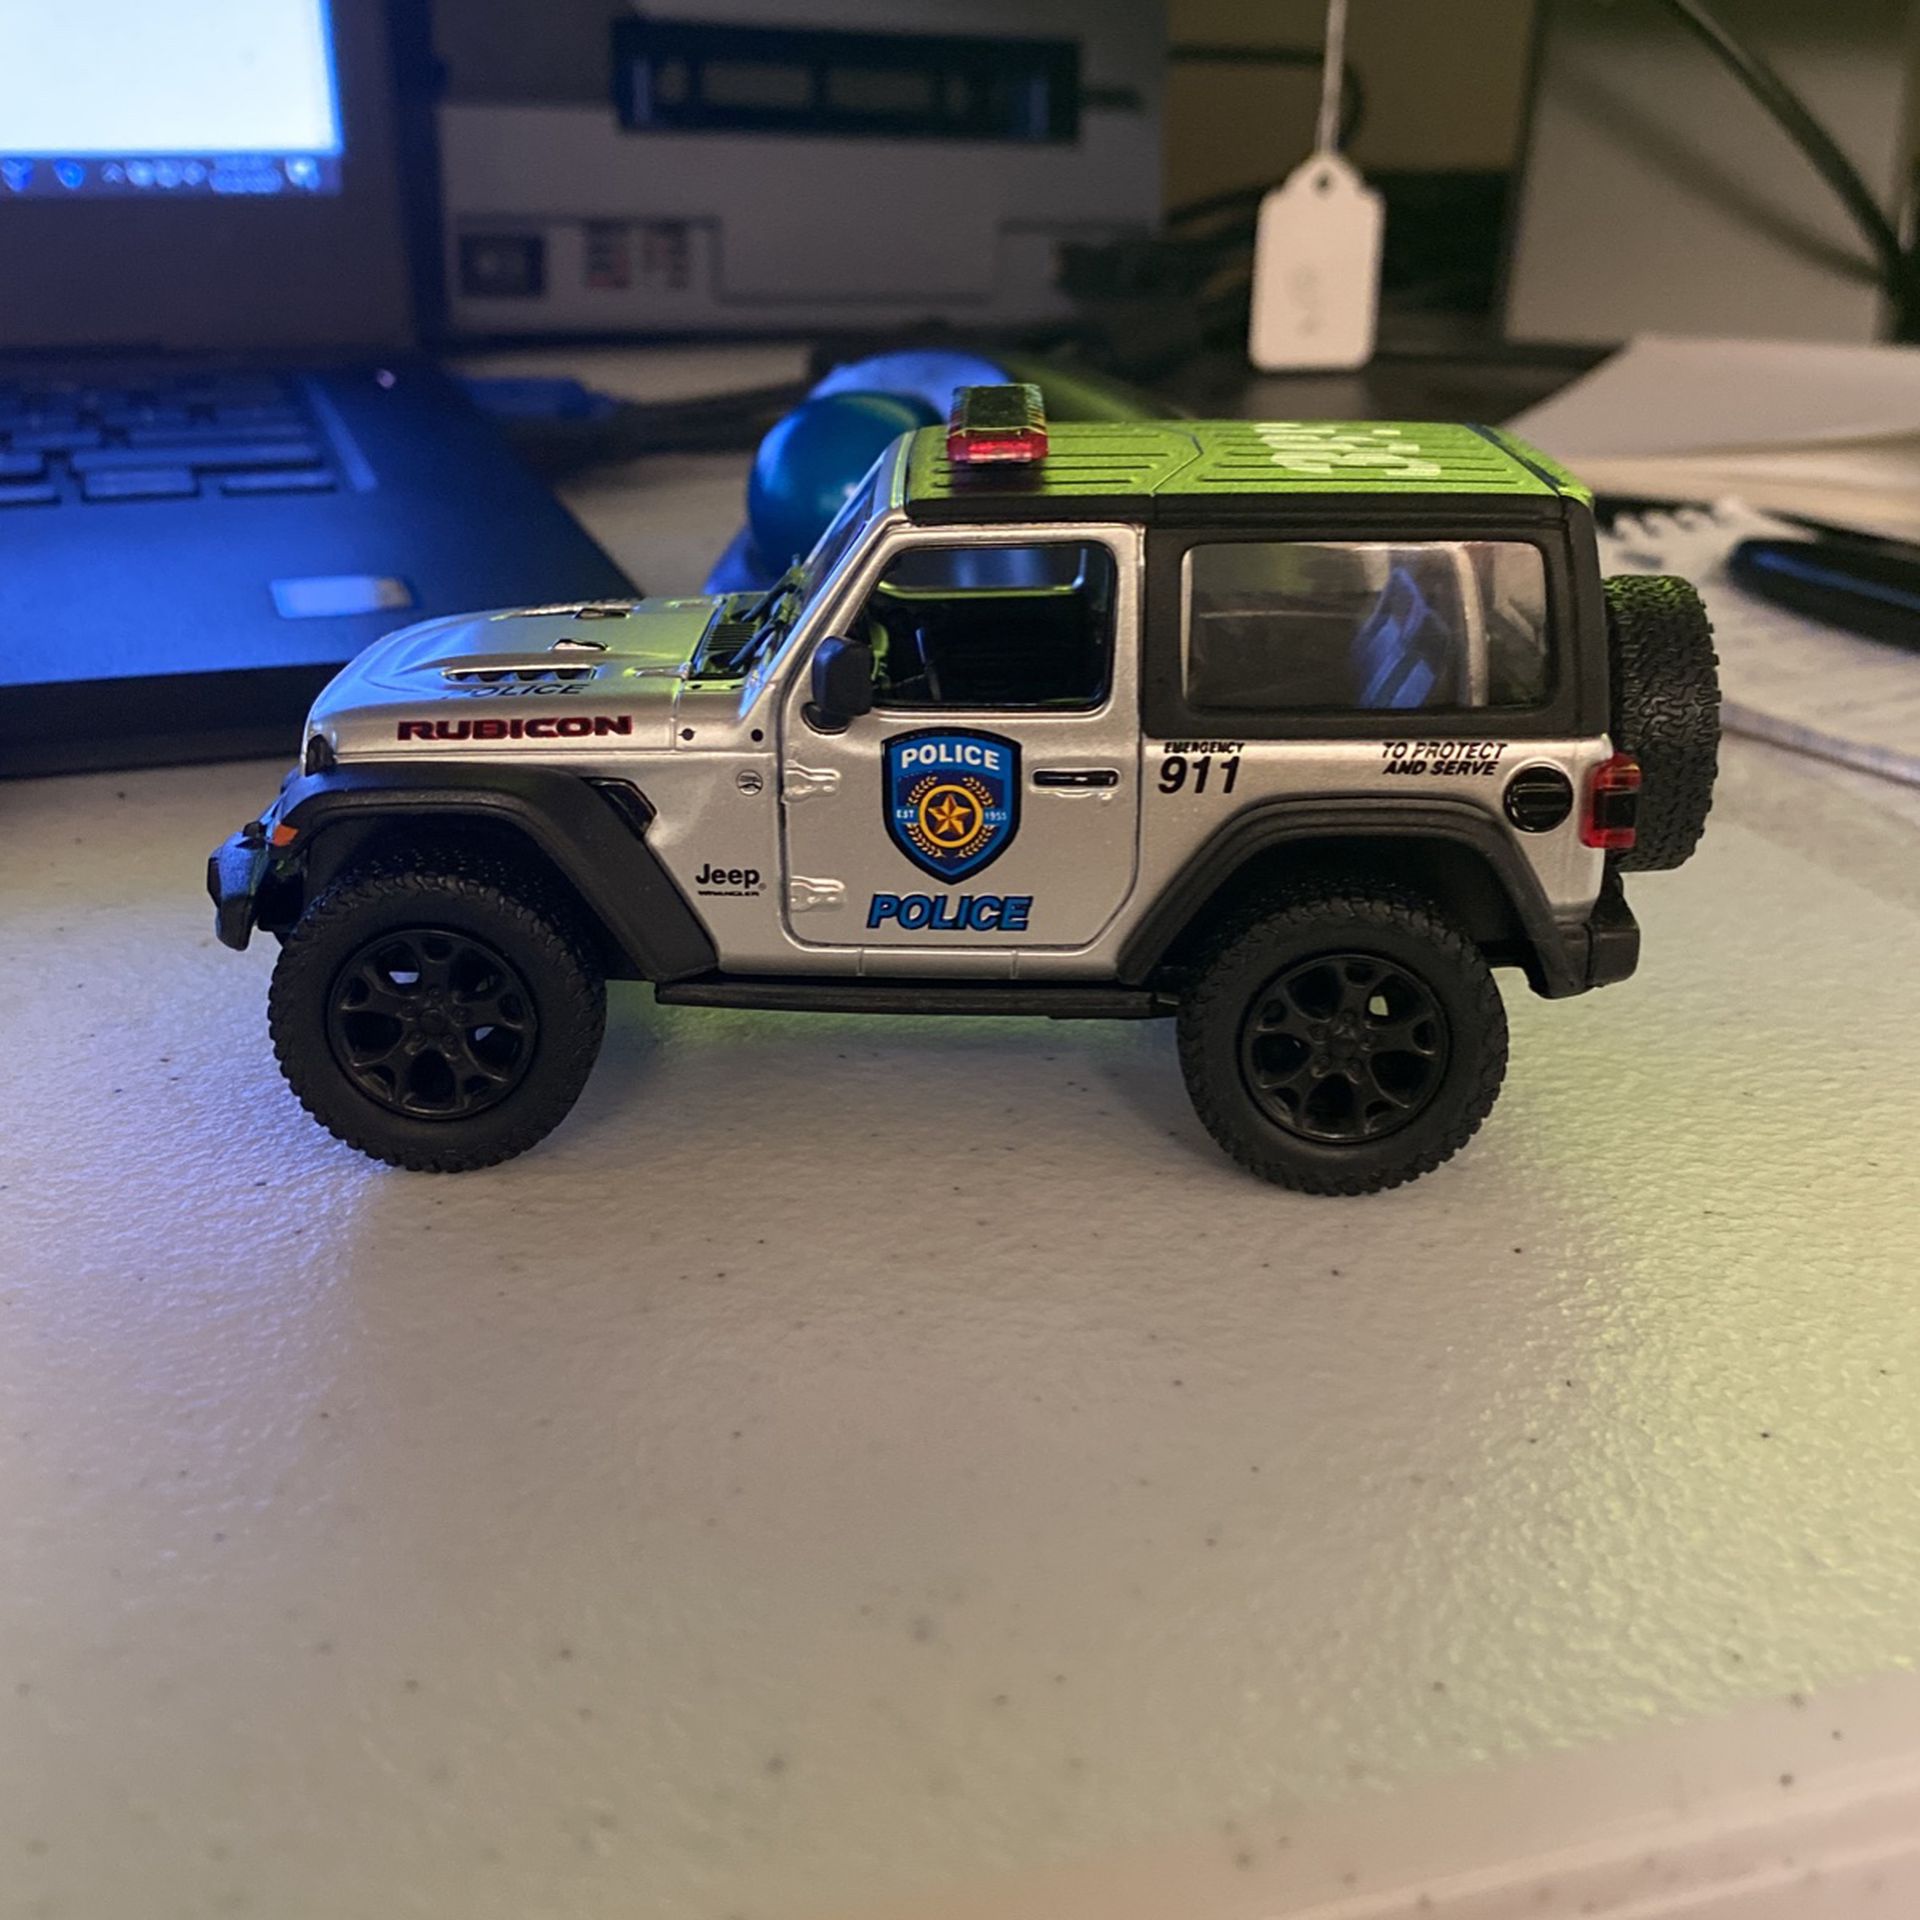 Jeep Rubicon Police Car Toy For Sale 